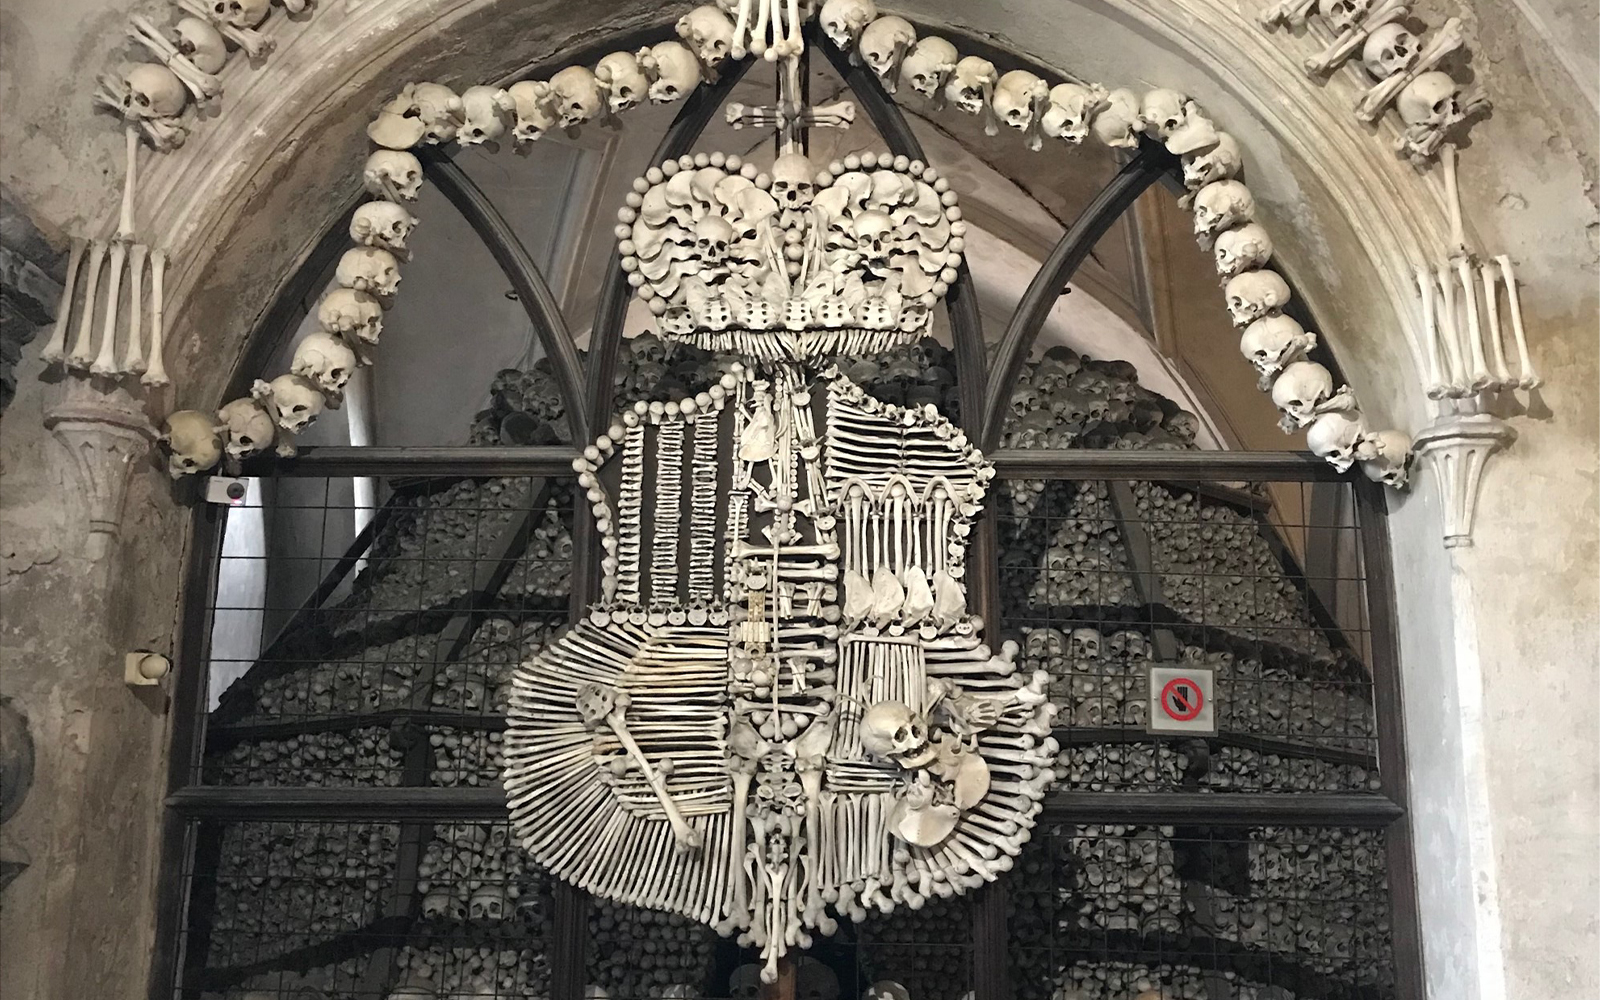 Coat of arms of the House of Schwarzenberg made out of human bones at Sedlec Ossuary. (Kasia Kolc / UConn School of Business)